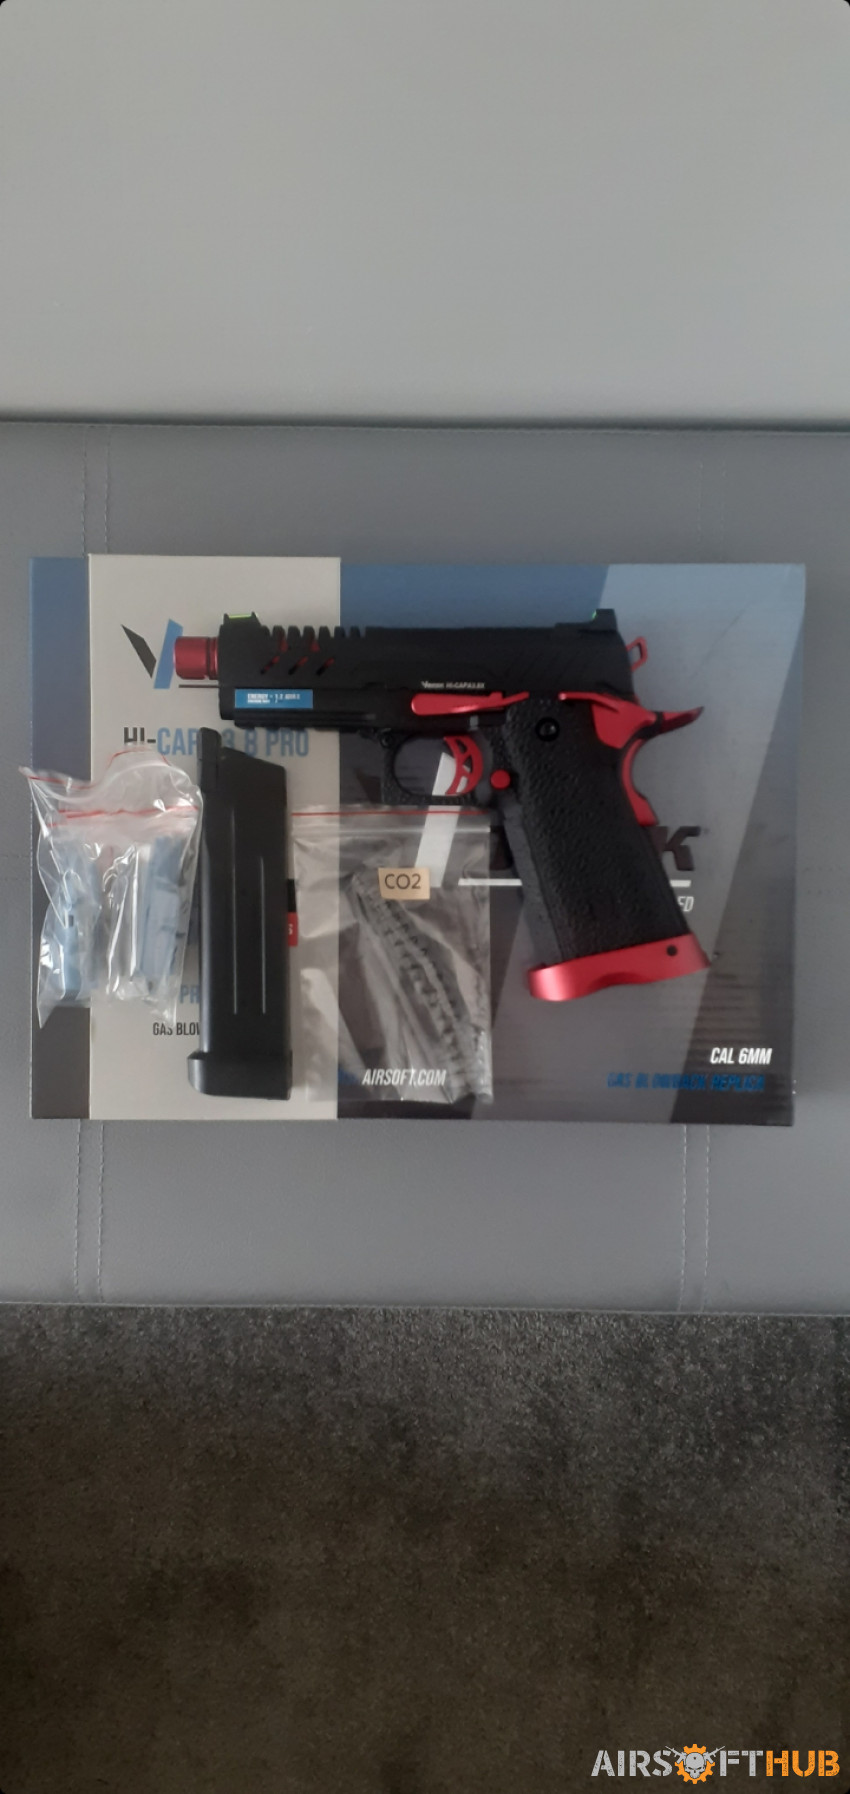 Vorsk 3.8 Pro Red Hi-Capa GBB - Used airsoft equipment